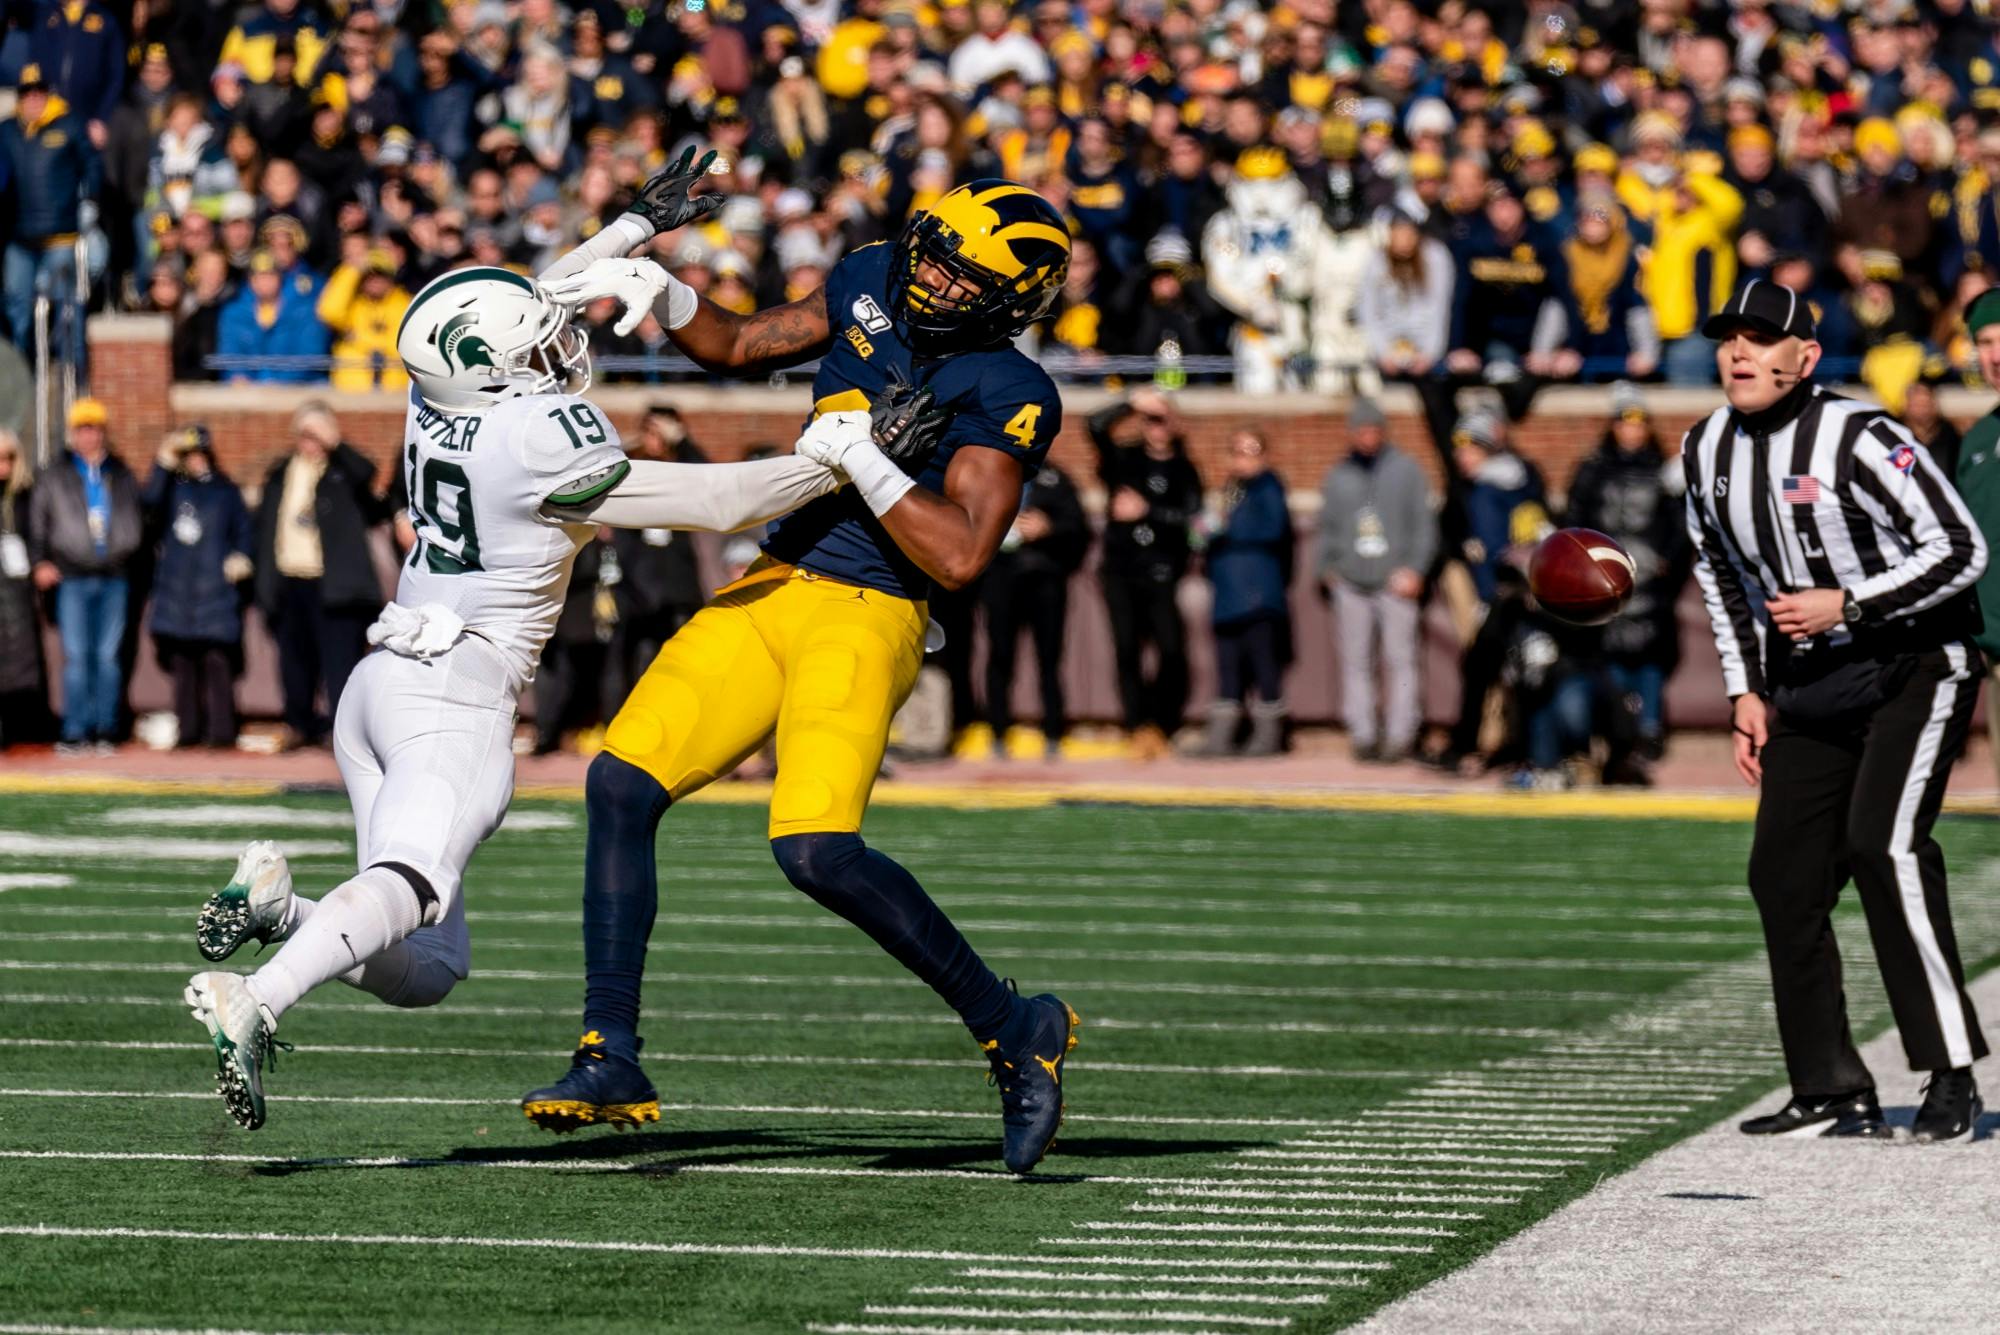 Senior corner back Josh Butler (19) tips a pass away from Michigan wide receiver Nico Collins (4). The Spartans fell to the Wolverines, 44-10, at Michigan Stadium on November 16, 2019. 